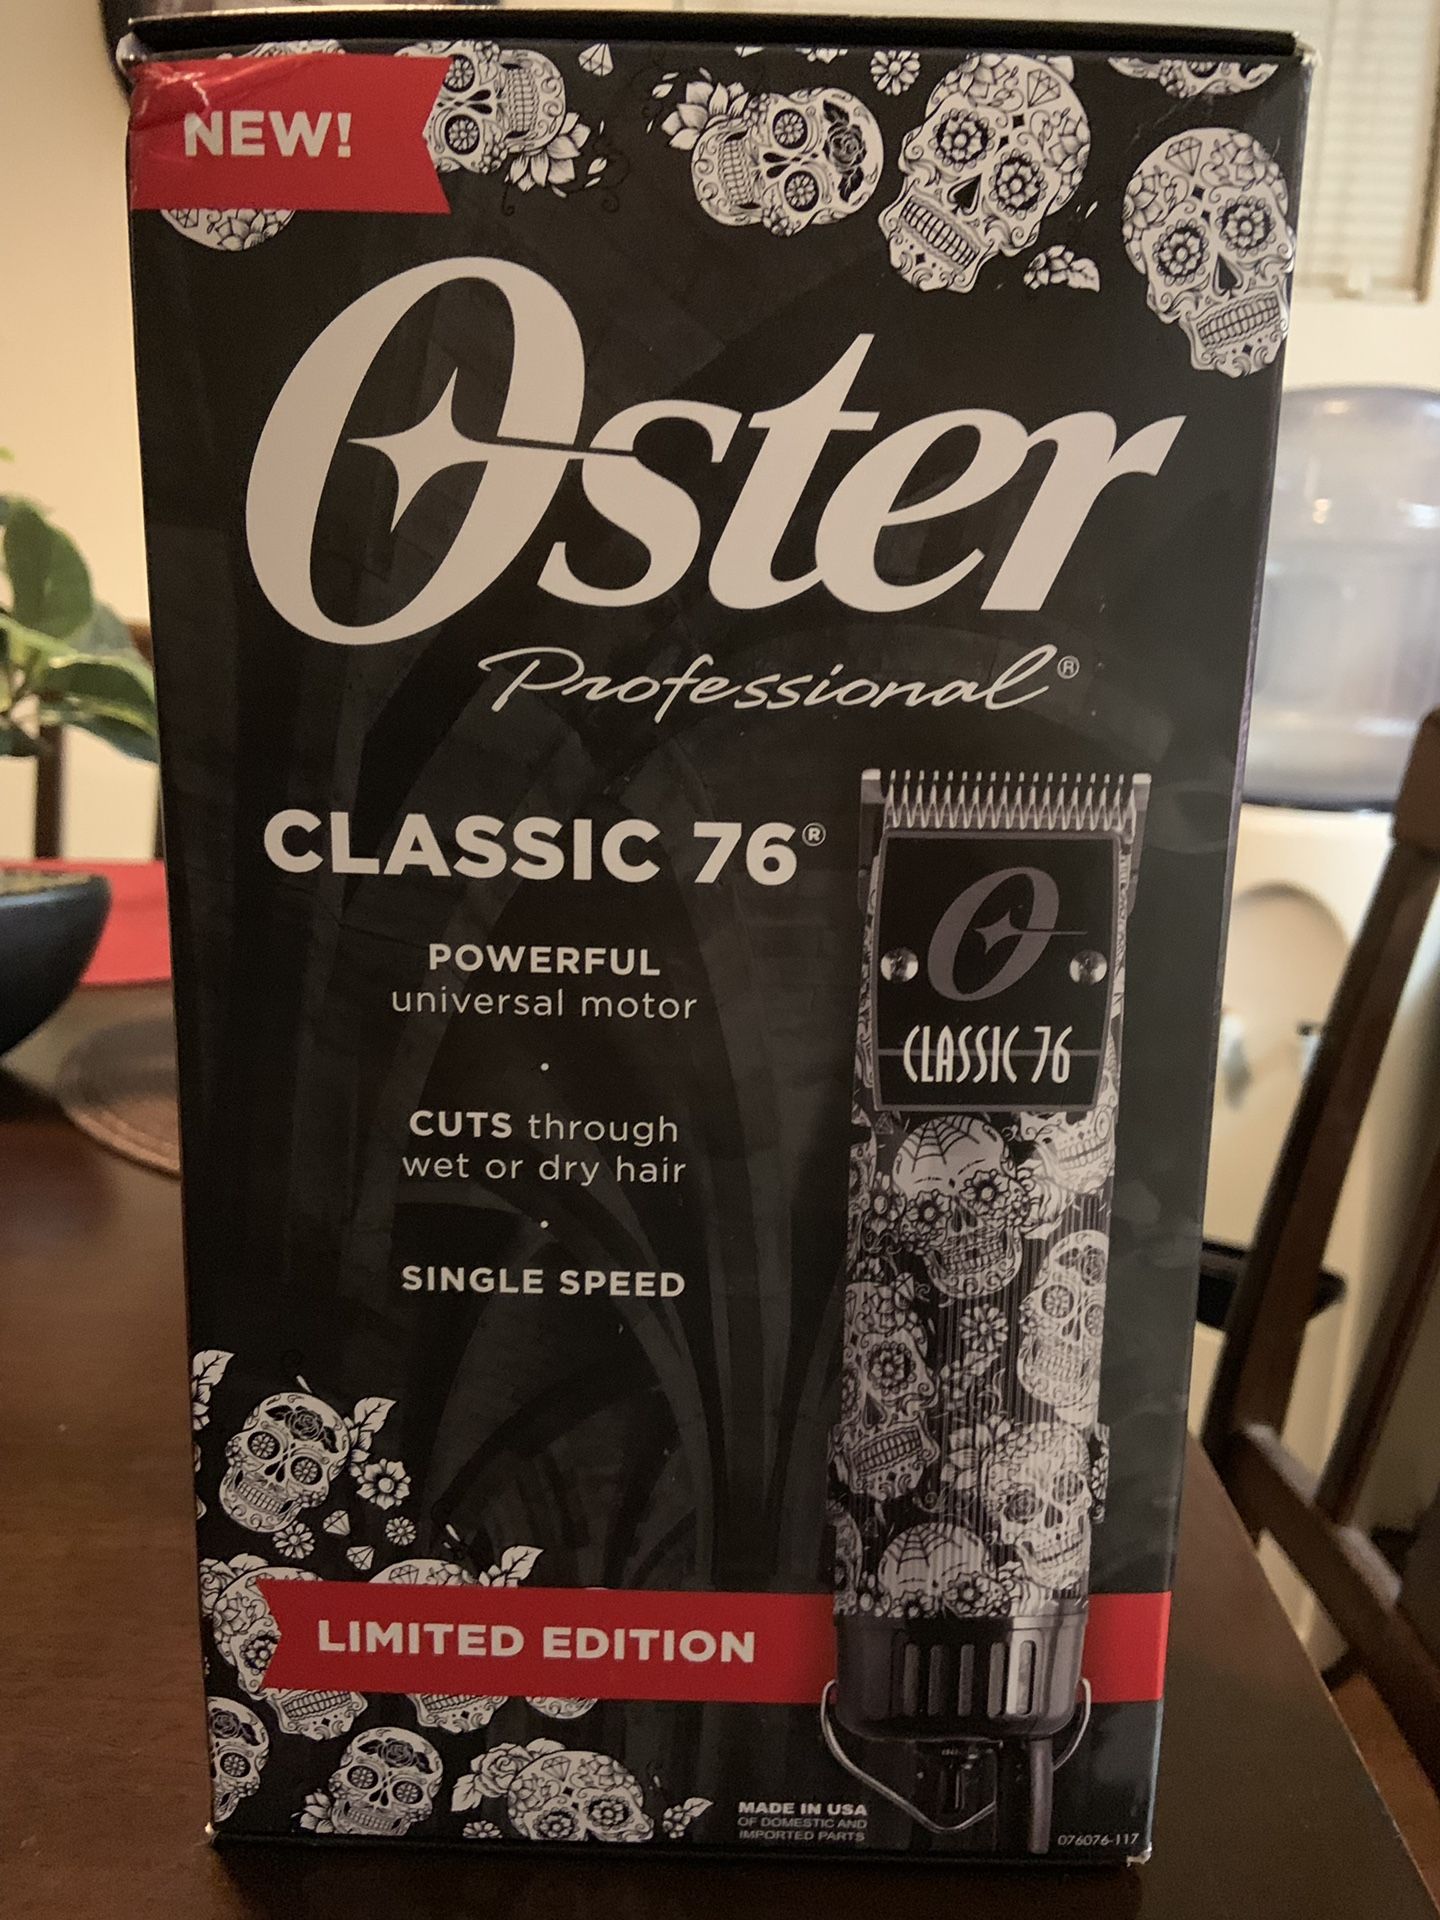 Brand new Oster Professional classic 76 hair clipper it’s worth $250.00 in stores